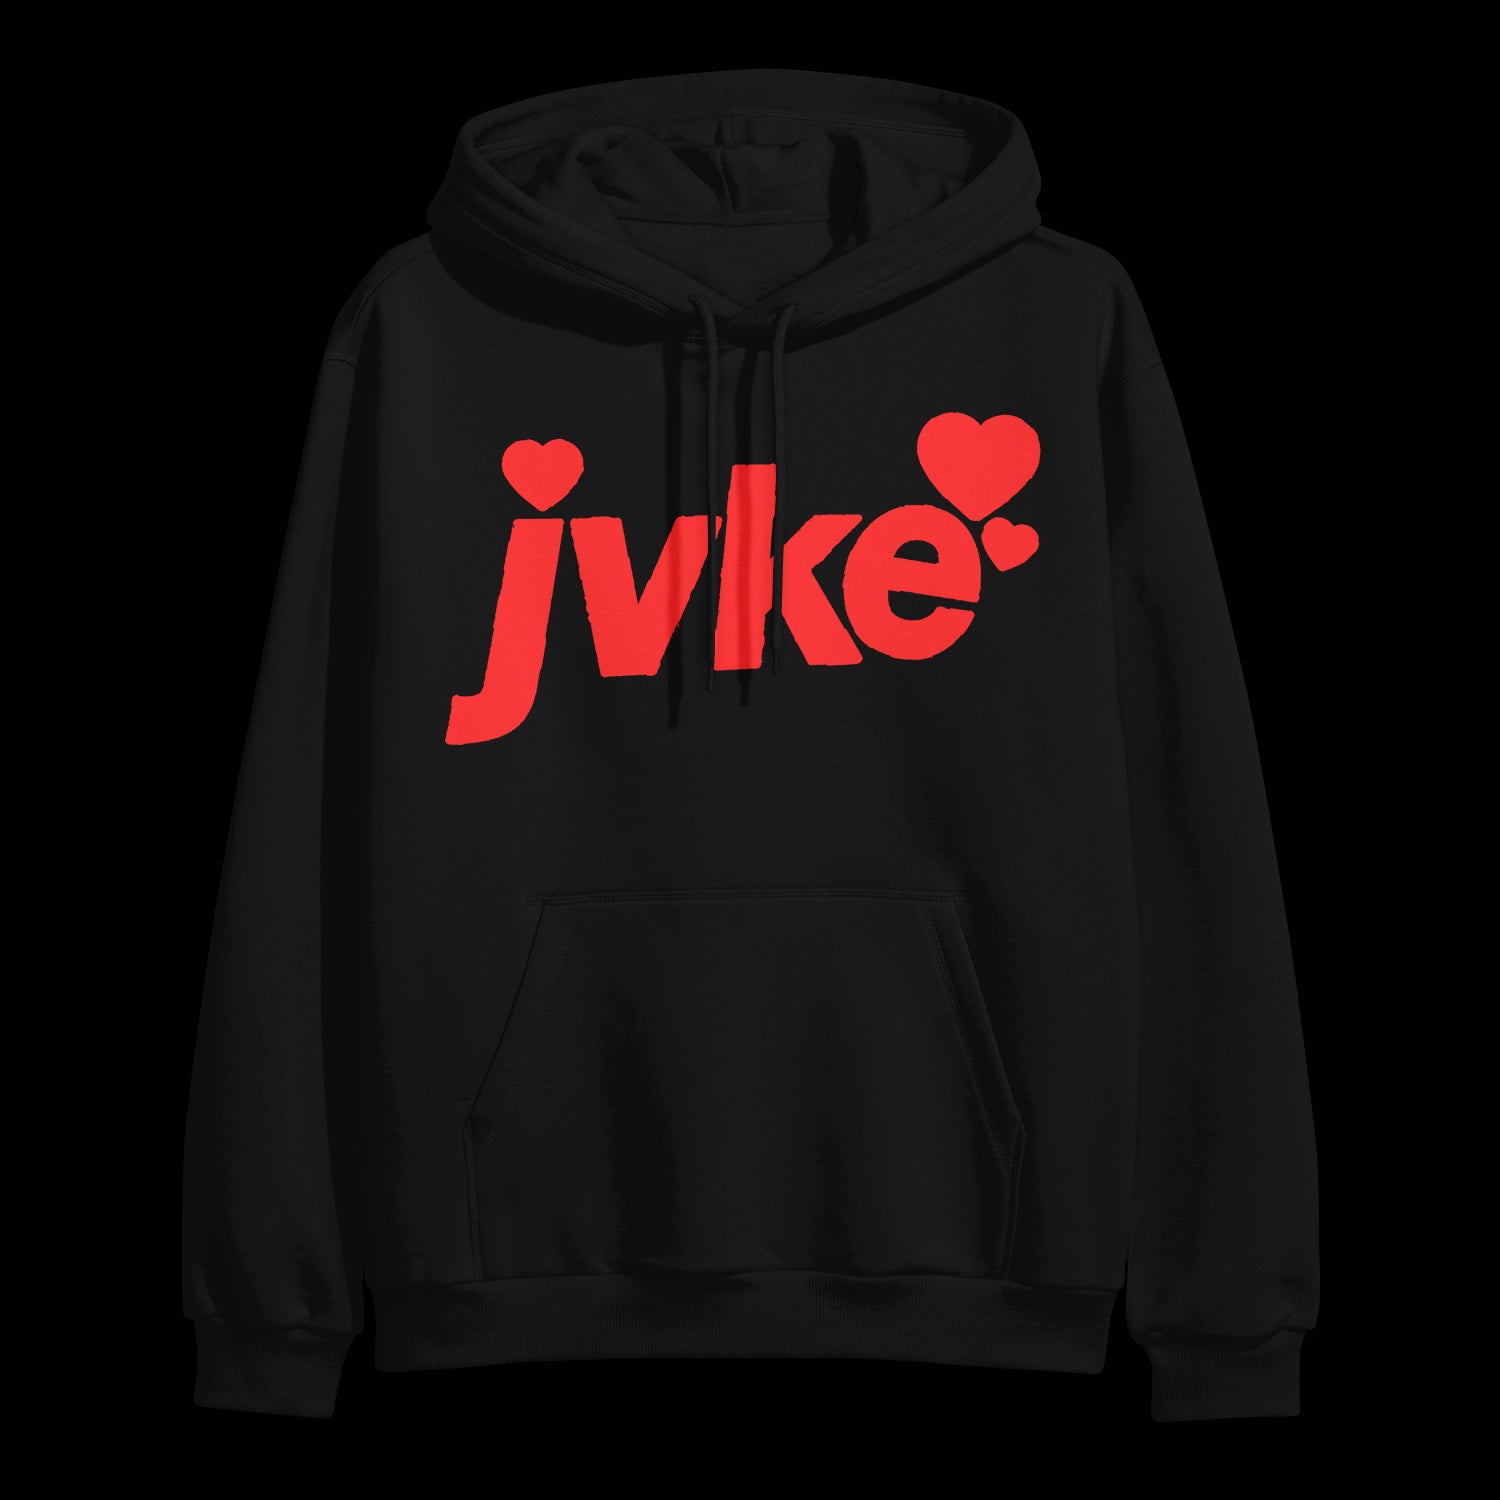 image of a black pullover hoodie. front has red print that says JVKE with hearts